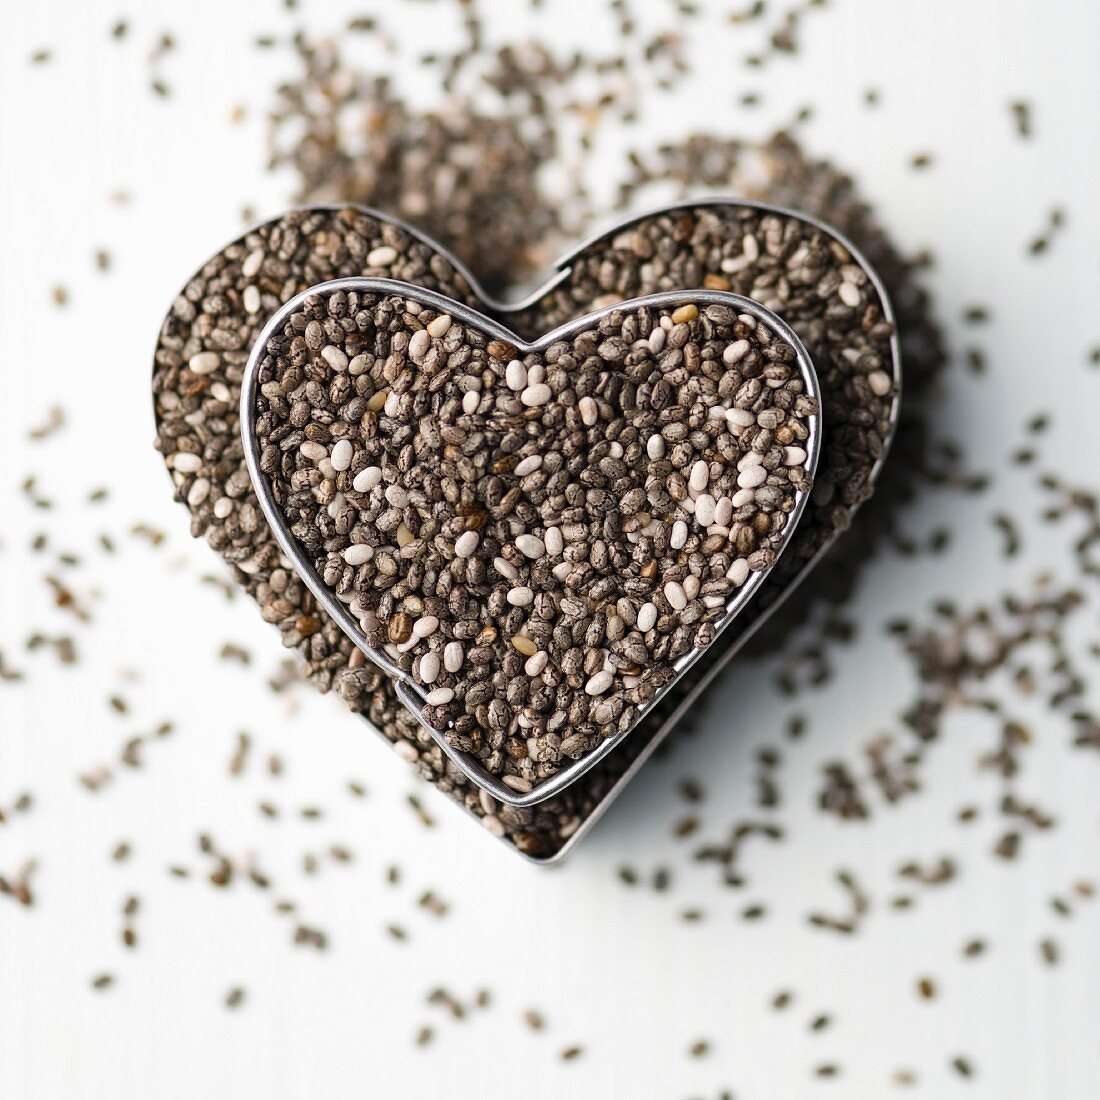 Chia seeds in heart-shaped cutters